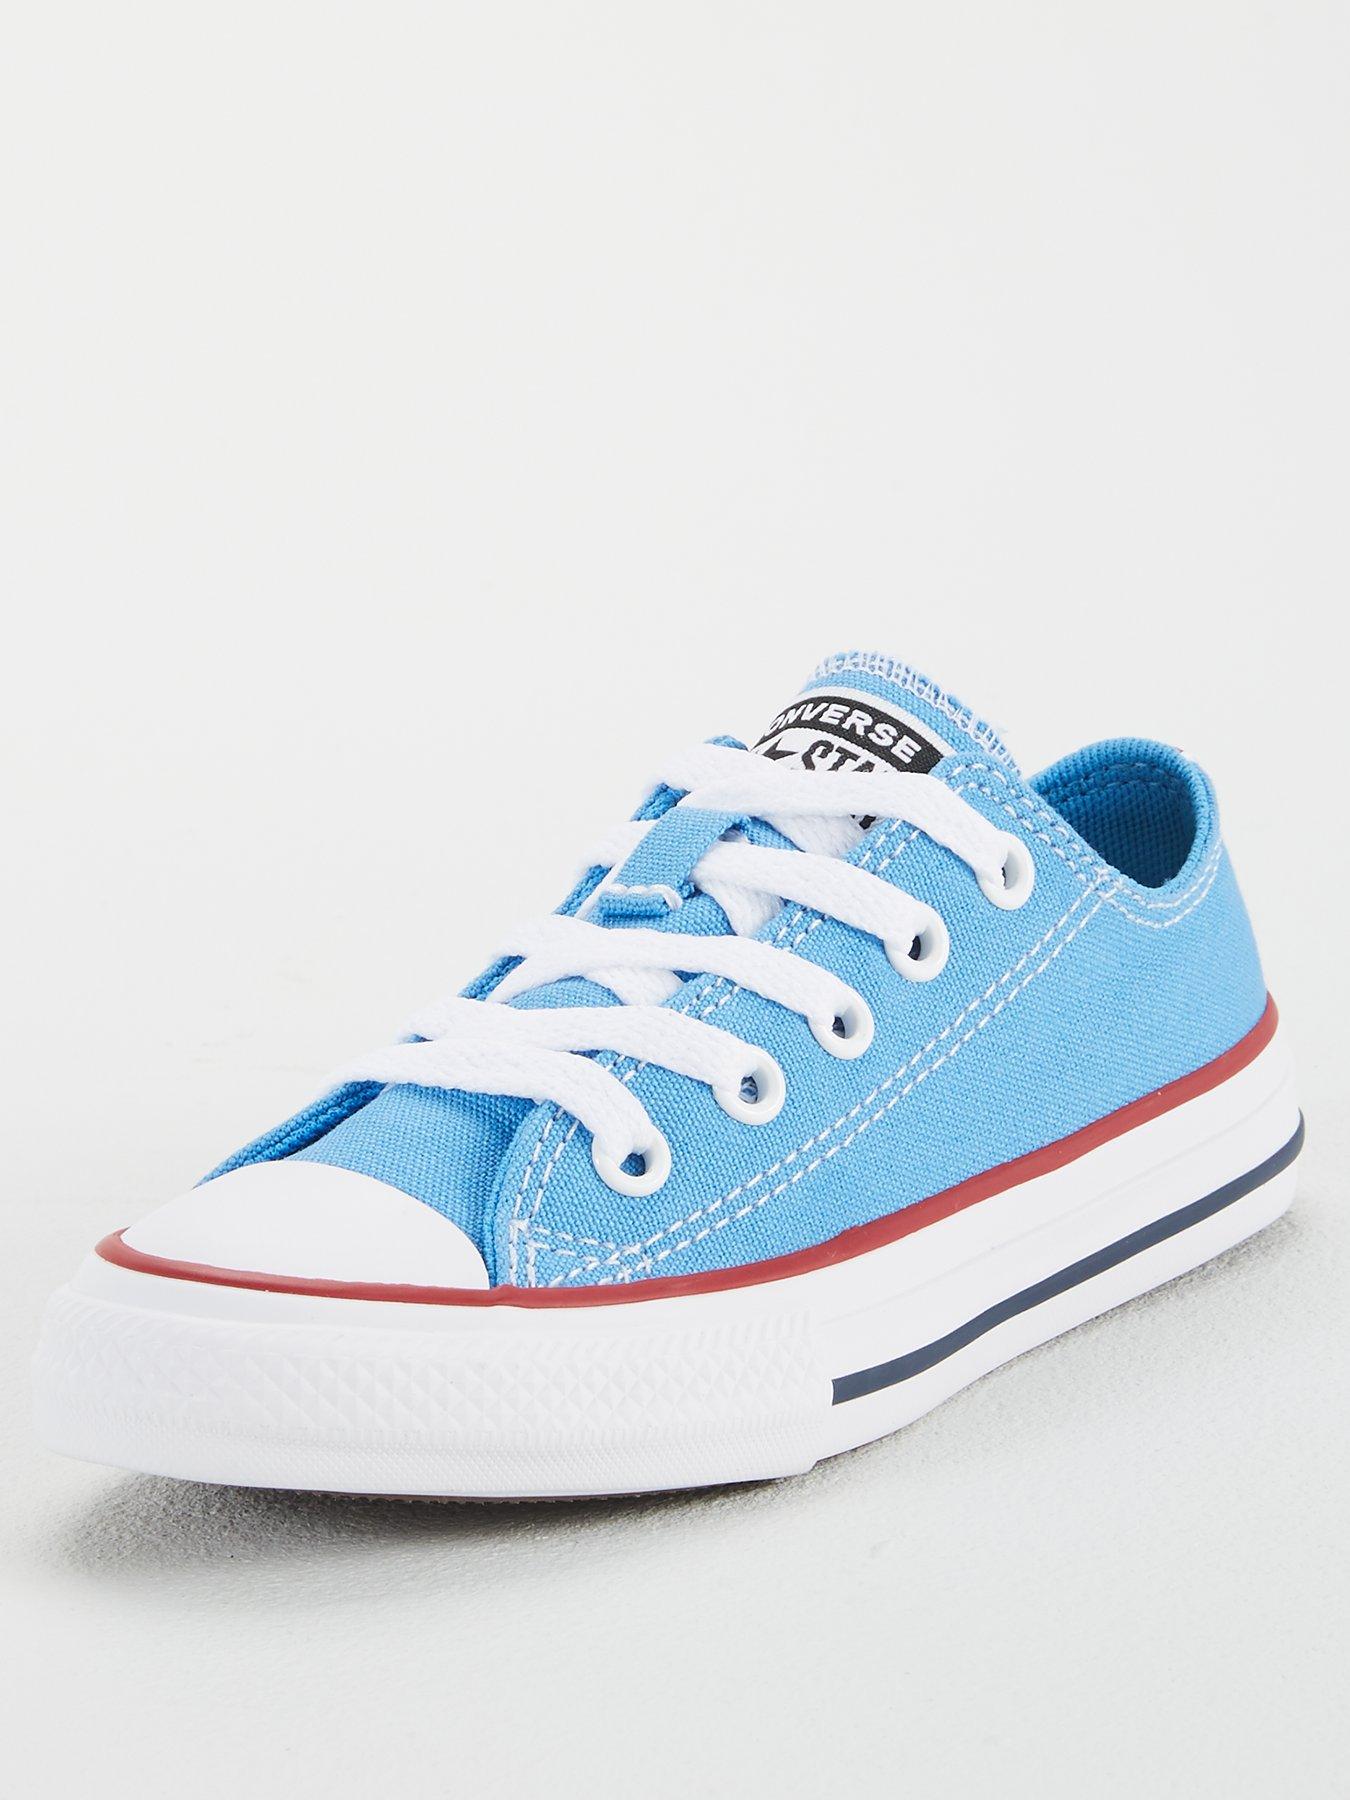 AJF,baby blue converse for toddlers 